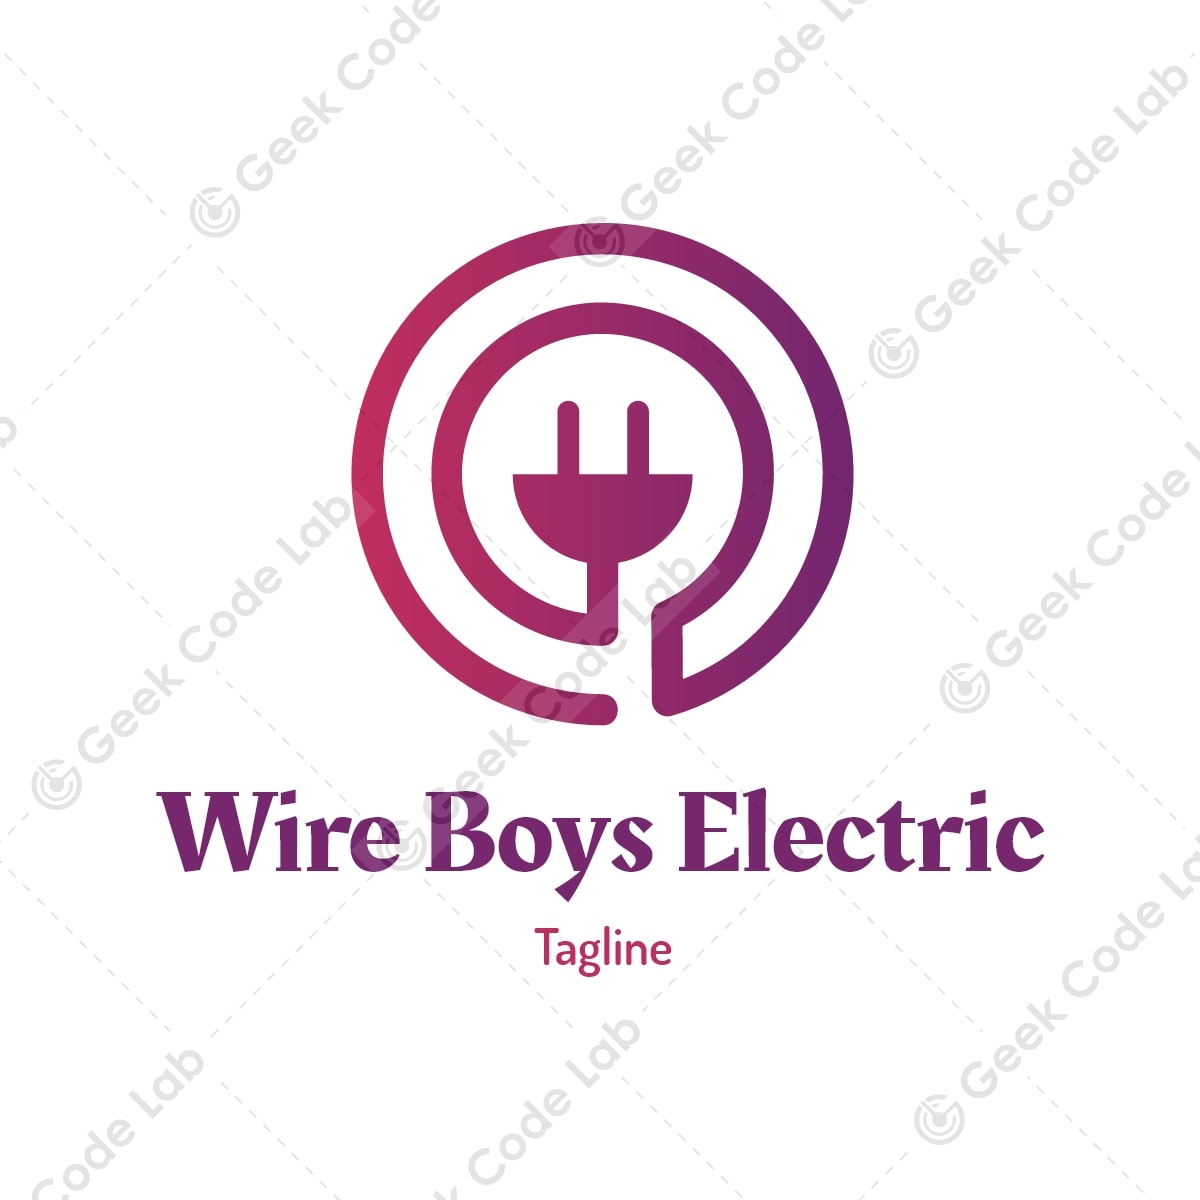 Wire Boys Electric